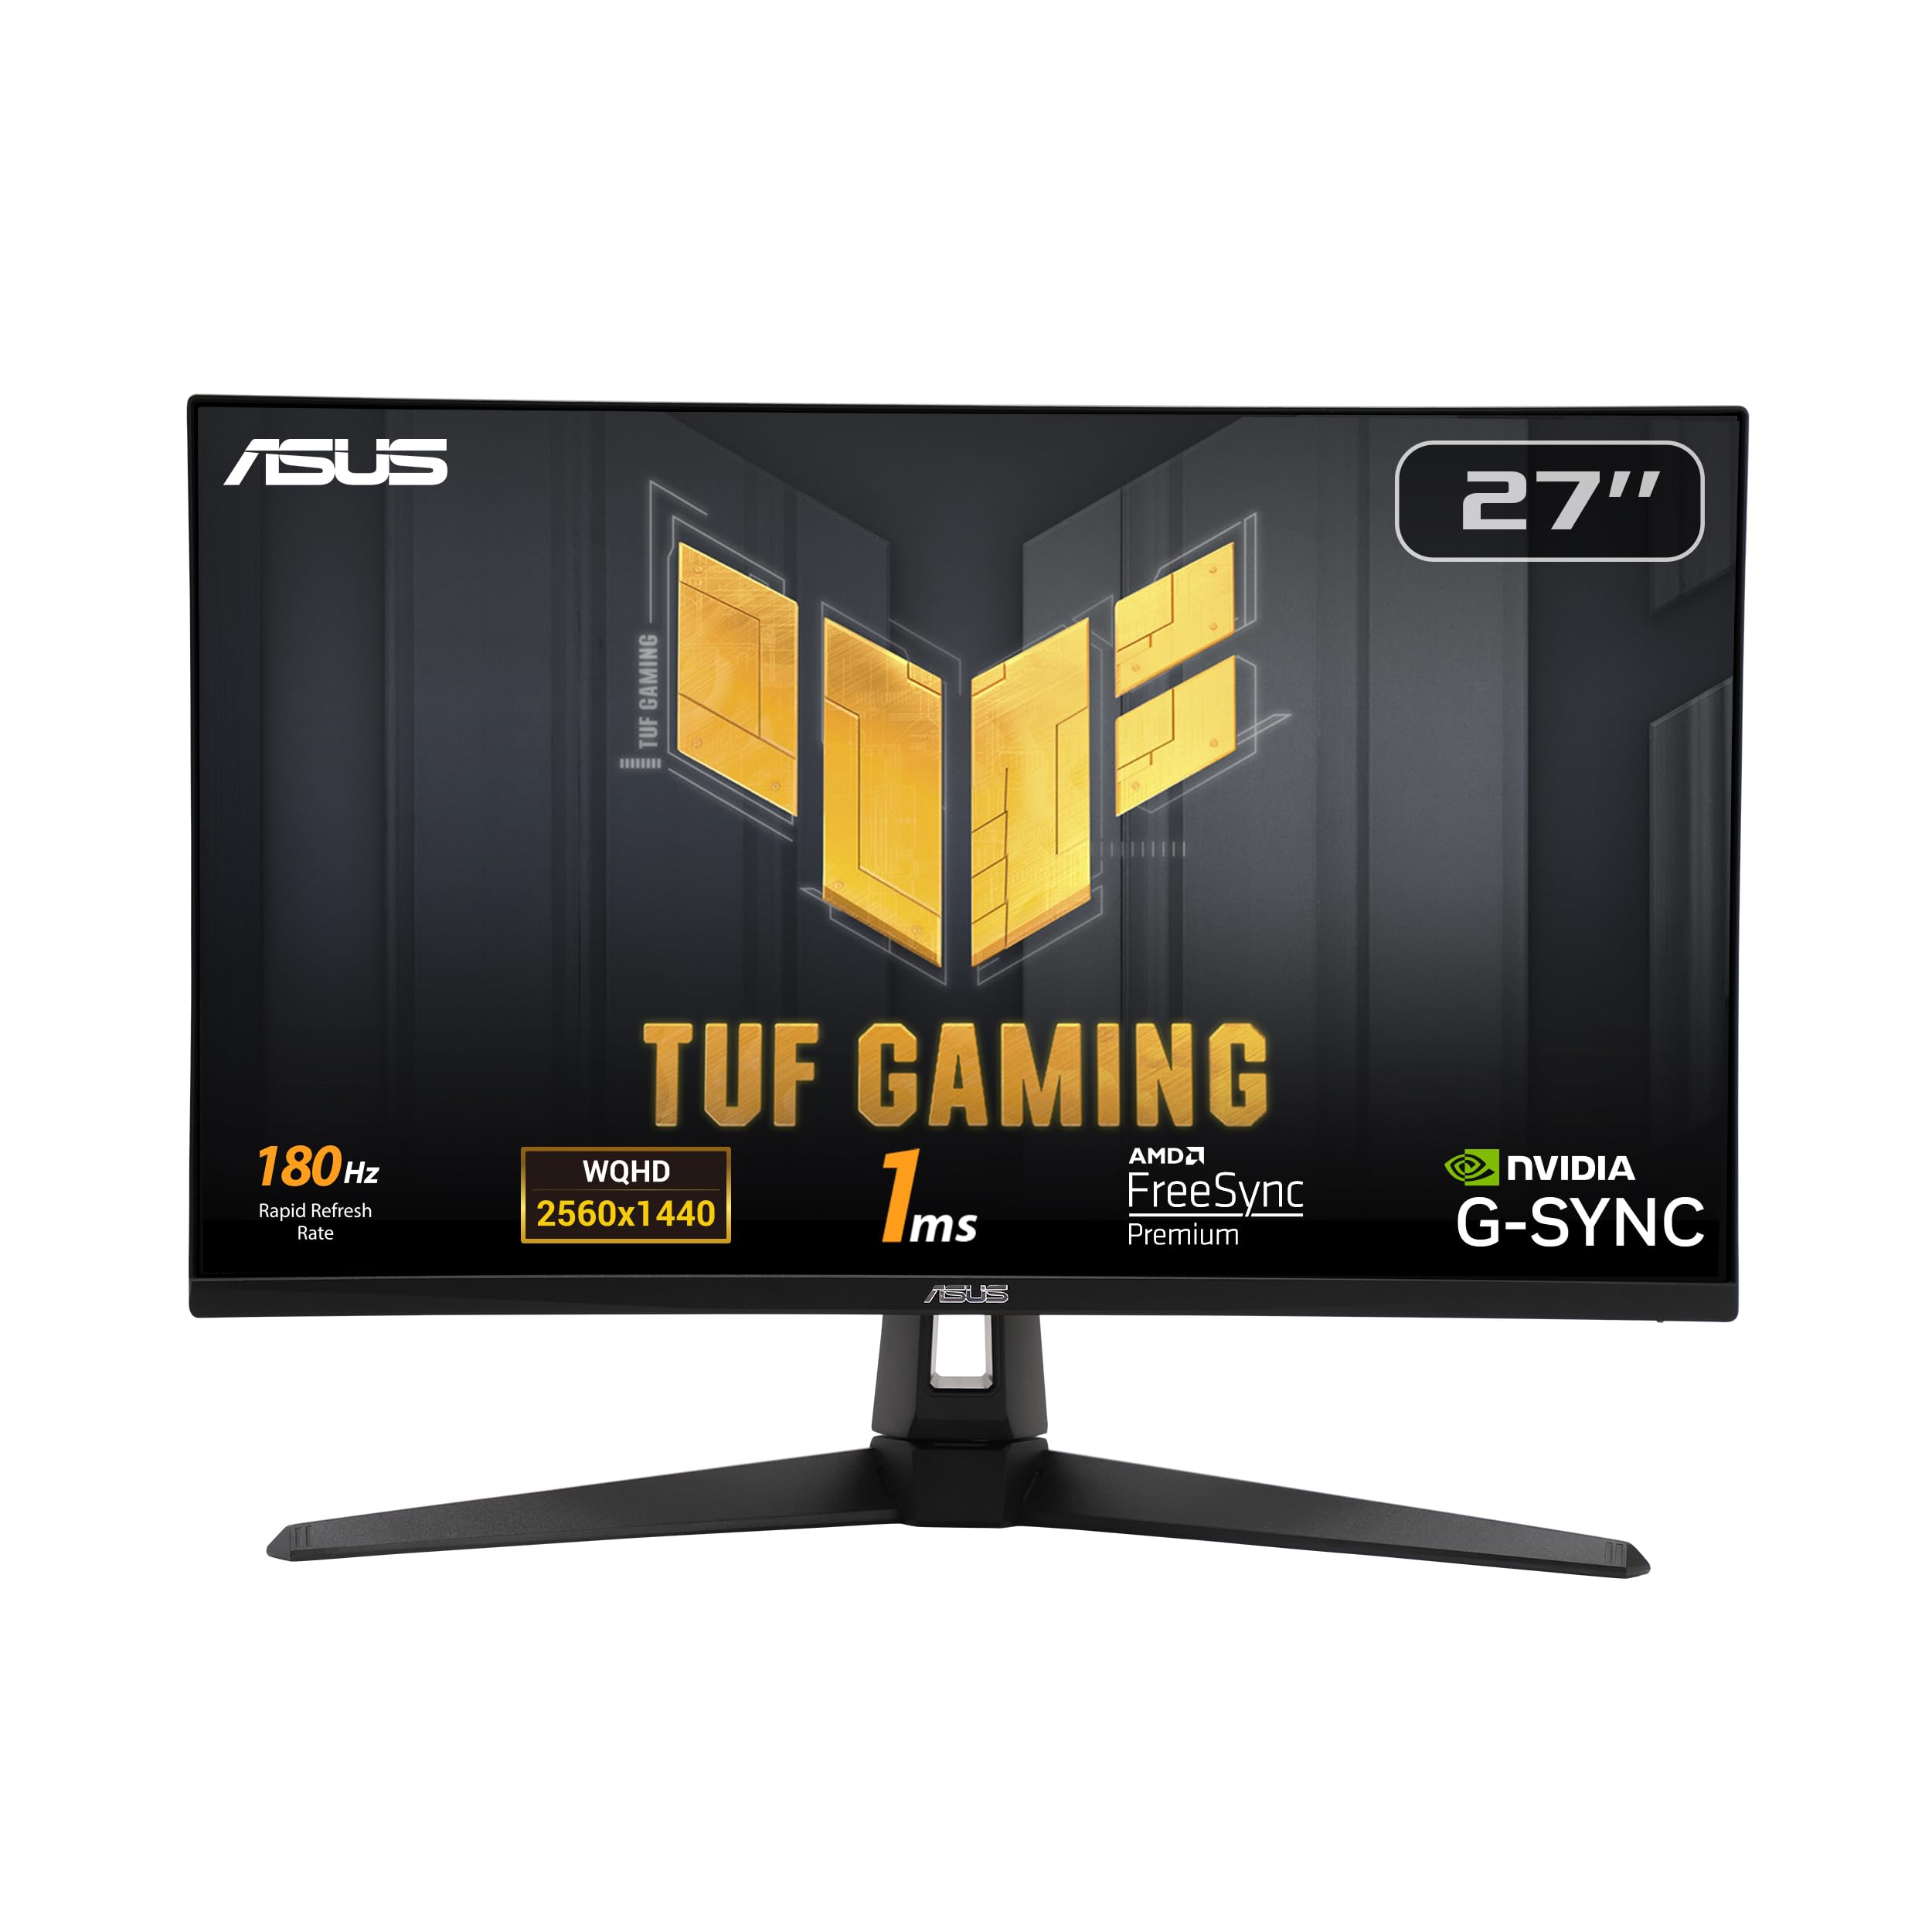 ASUS TUF Gaming 27” 1440P HDR Monitor (VG27AQ3A) – QHD (2560 x 1440), 180Hz, 1ms, Fast IPS, 130% sRGB, Extreme Low Motion Blur Sync, Speakers, Freesync Premium, G-SYNC Compatible, HDMI, Only $199.00